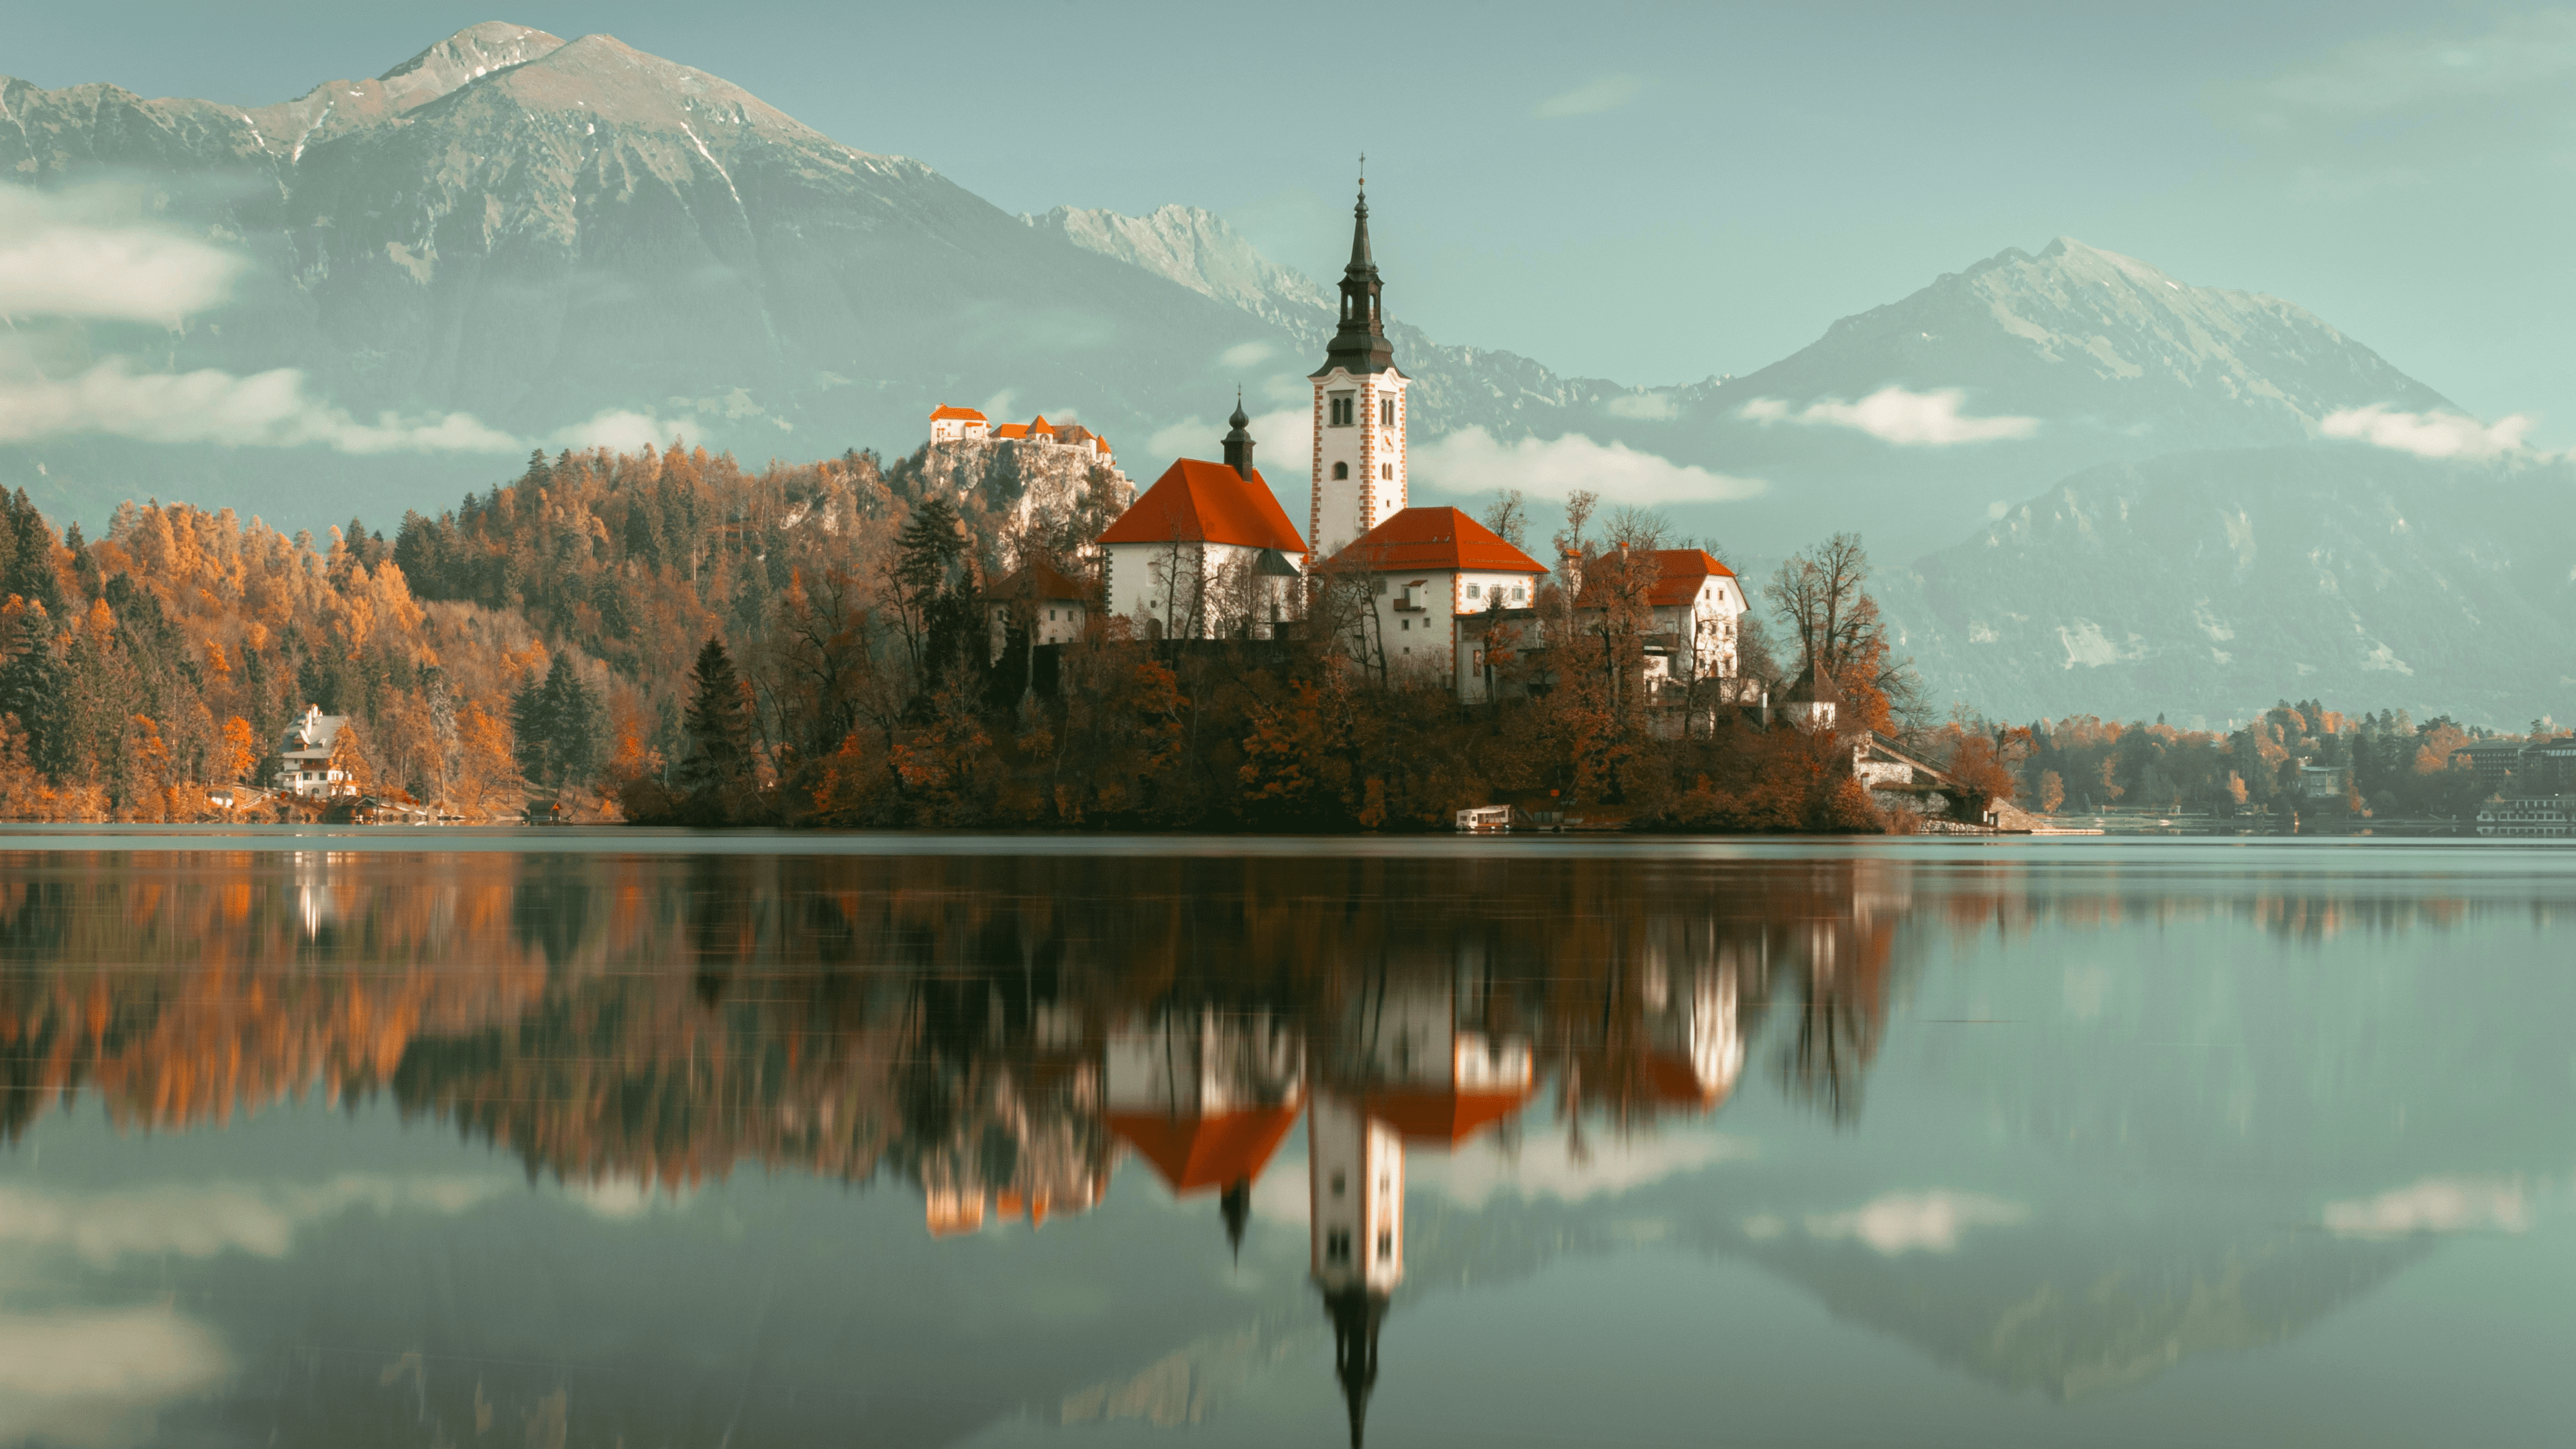 General 3840x2160 nature landscape trees mountains clouds sky water reflection church Lake Bled Slovenia island fall